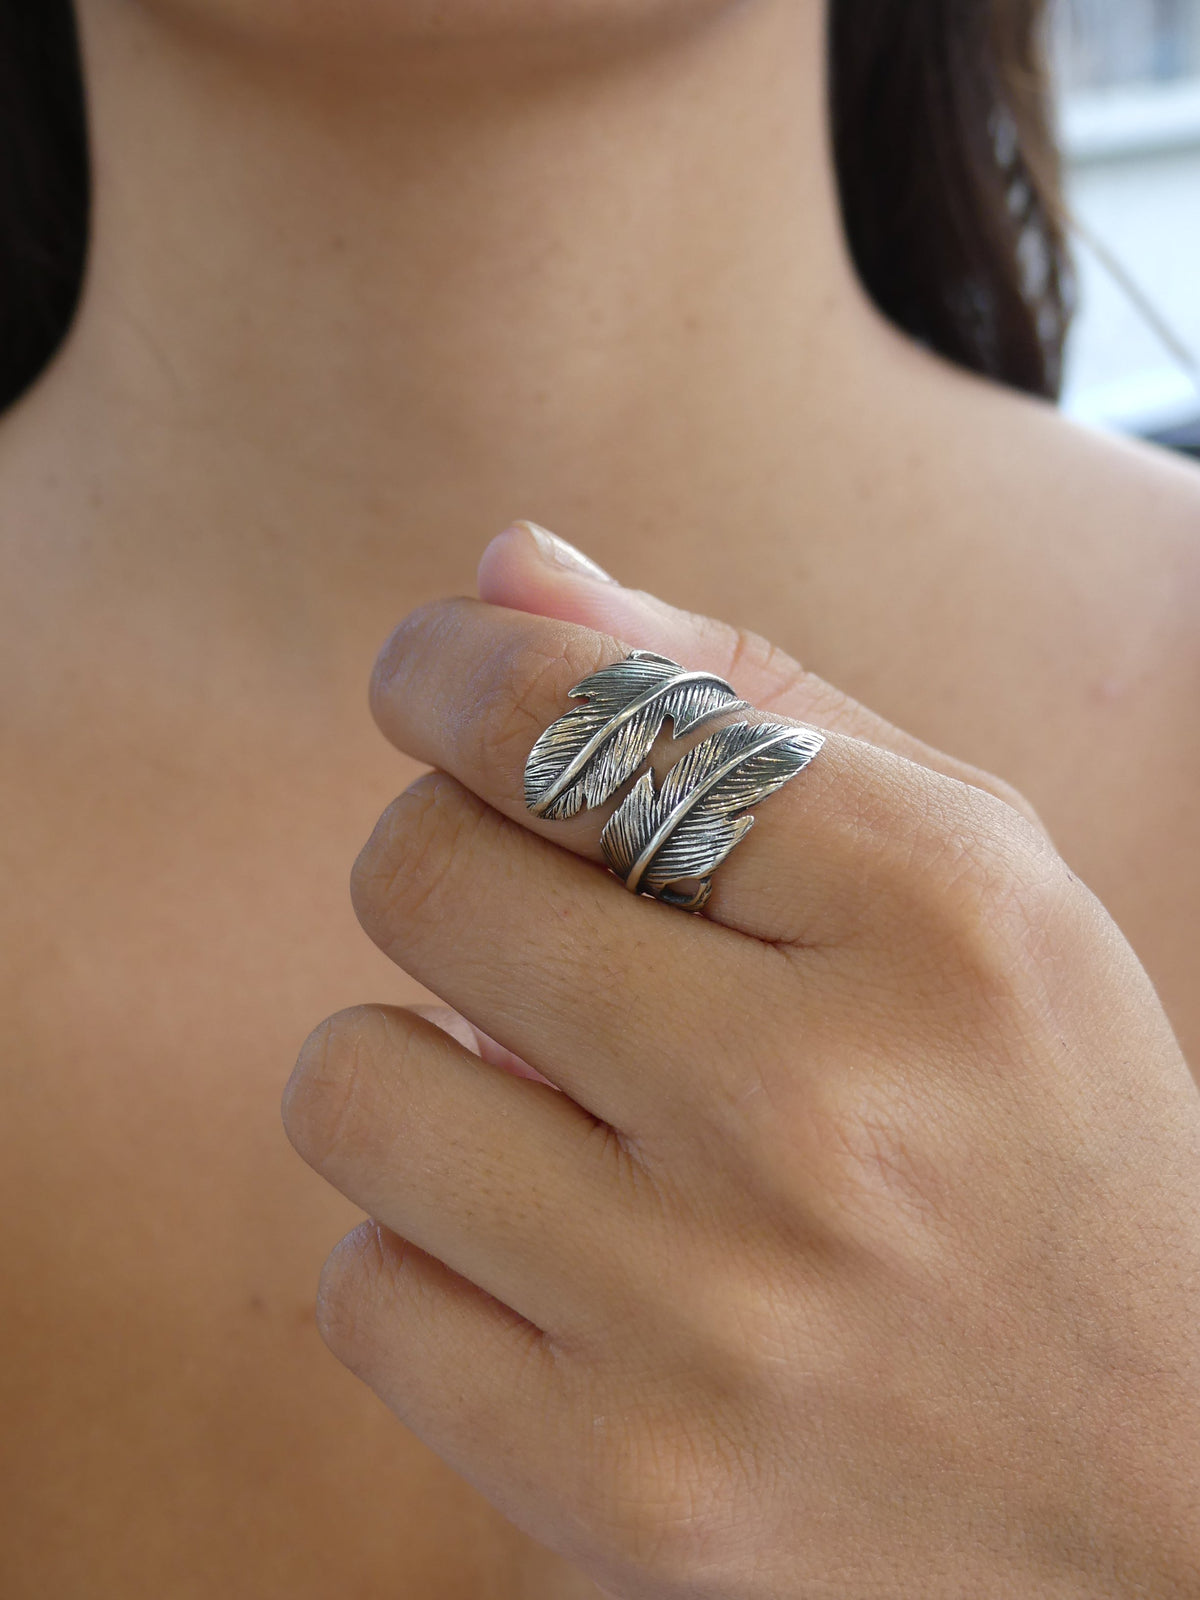 rings, silver rings, adjustable rings, 925 silver rings, feather rings, fashion. jewelry, statement jewelry, long rings, long silver rings, ring with a leaf, ring for men, rings for women, trending jewelry, fashion jewelry, statement jewelry, statement rings, gift ideas, rings for the middle finger, nice jewelry, ring for the middle finger, accessories, silver accessories, nice rings, designer rings, kesley jewelry, kelsey, feather ring